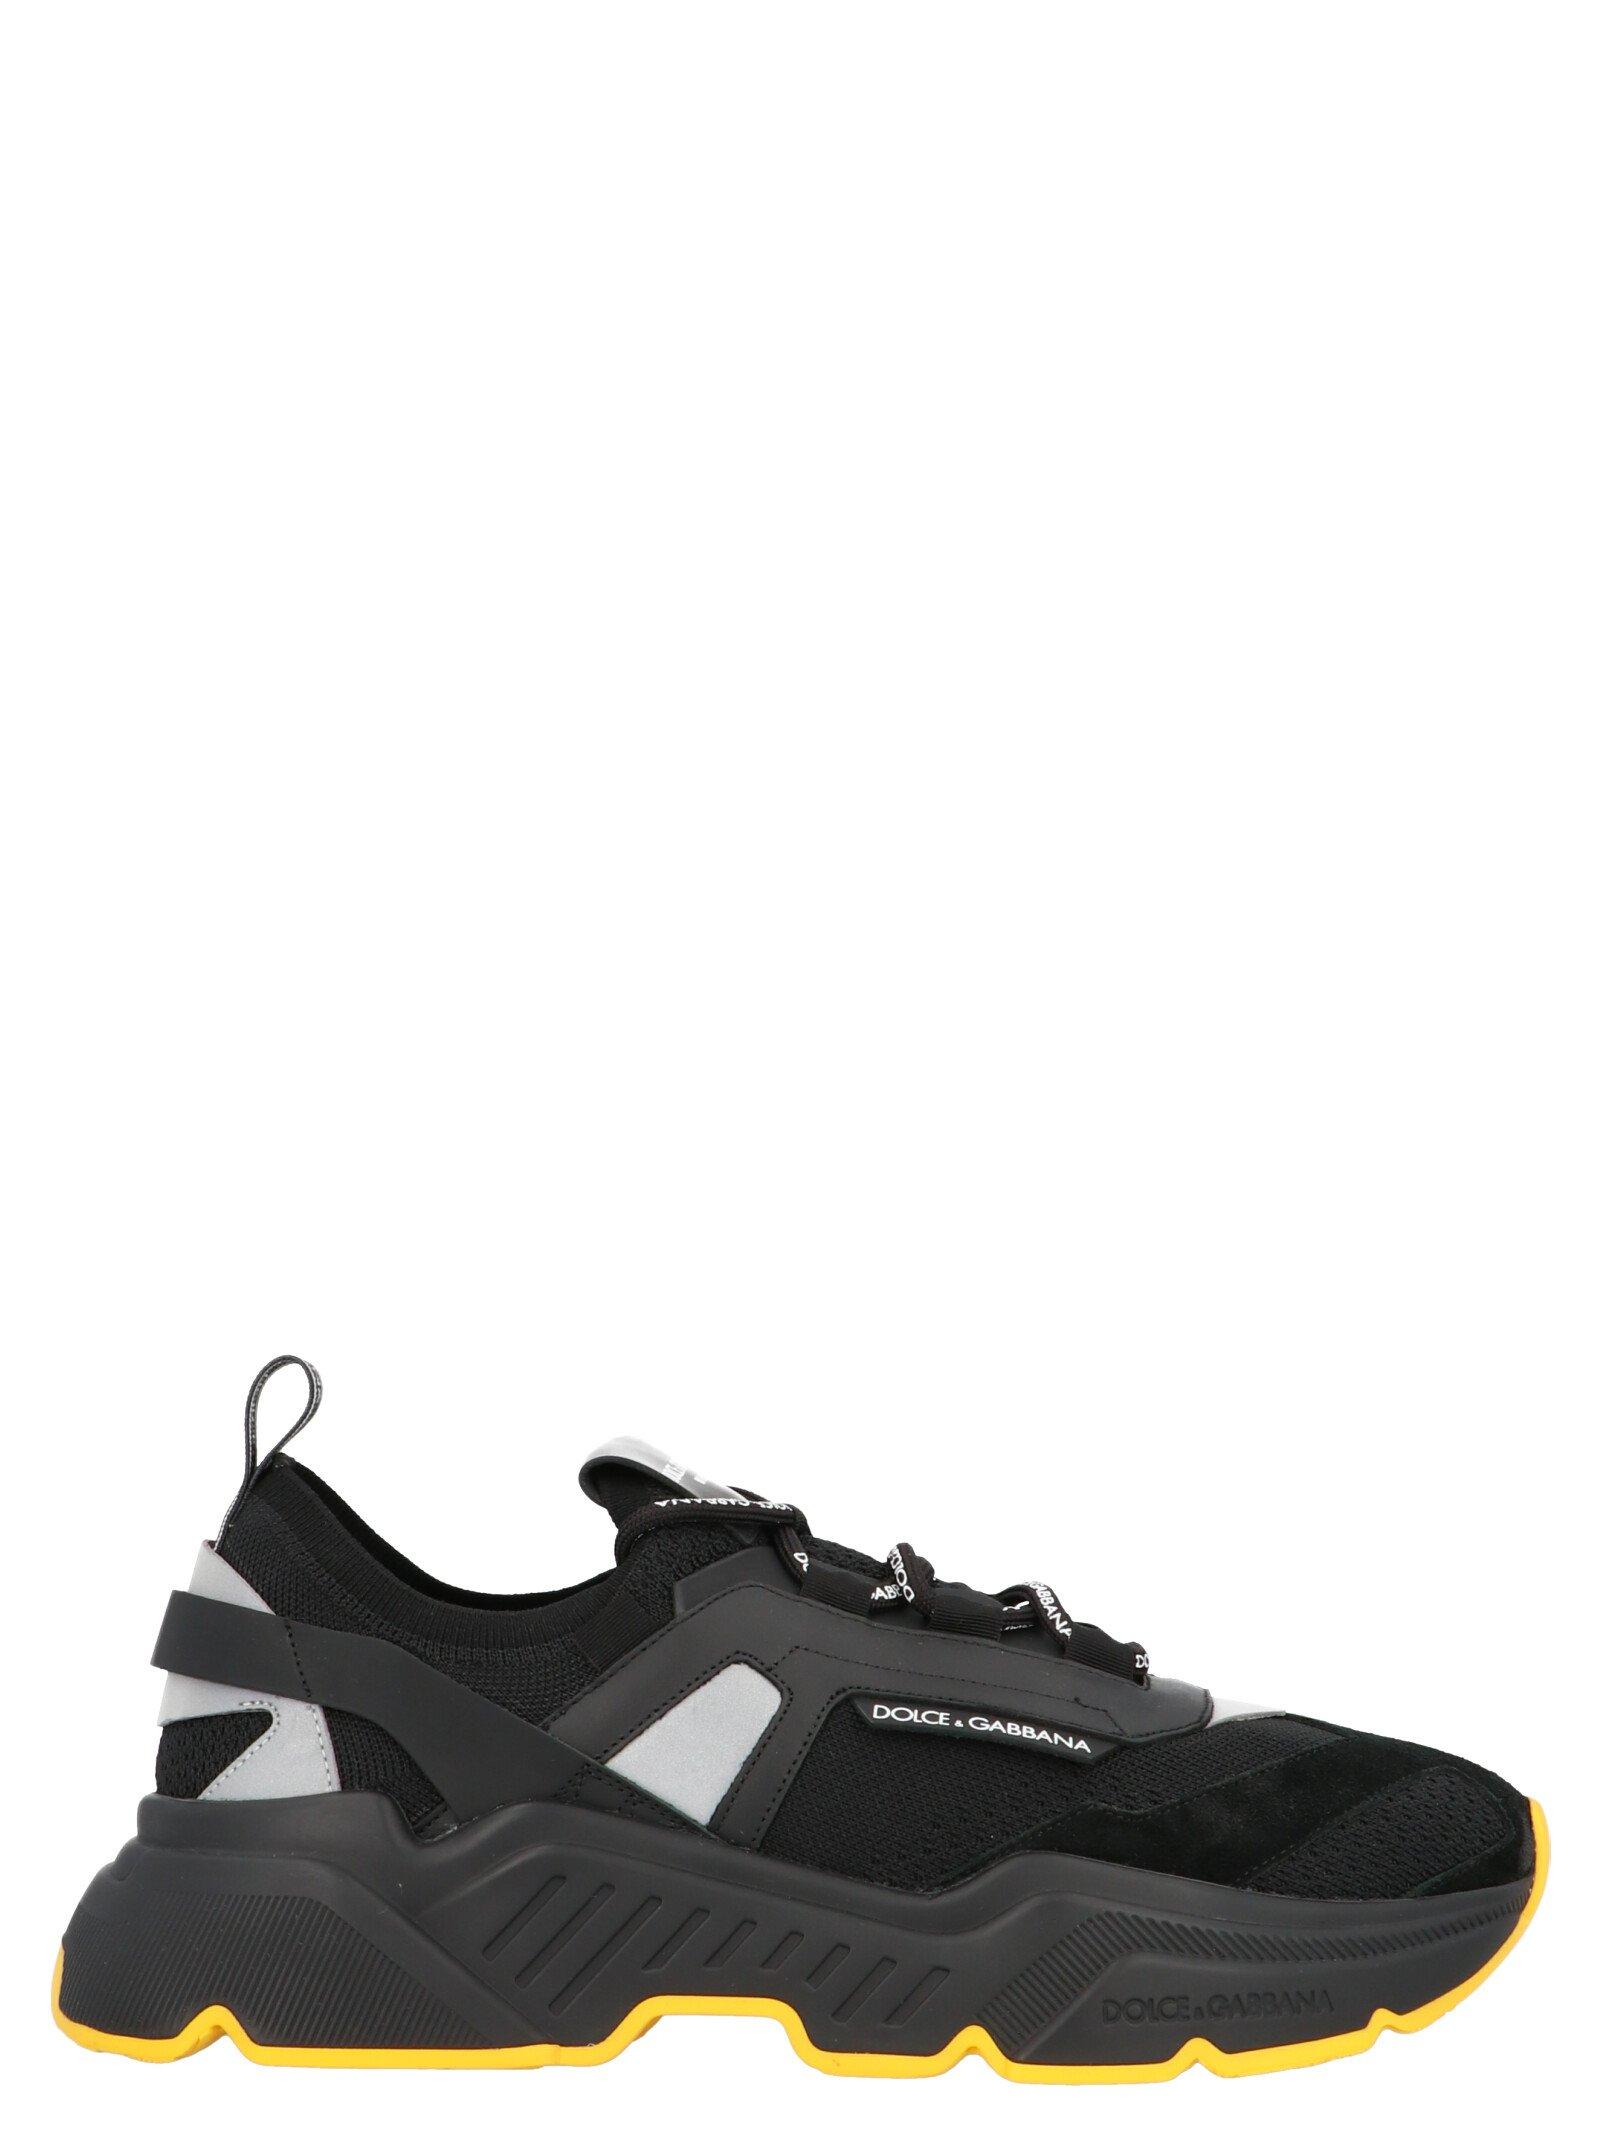 Dolce & Gabbana Daymaster Sneakers In Stretch Knit Fabric in Black 